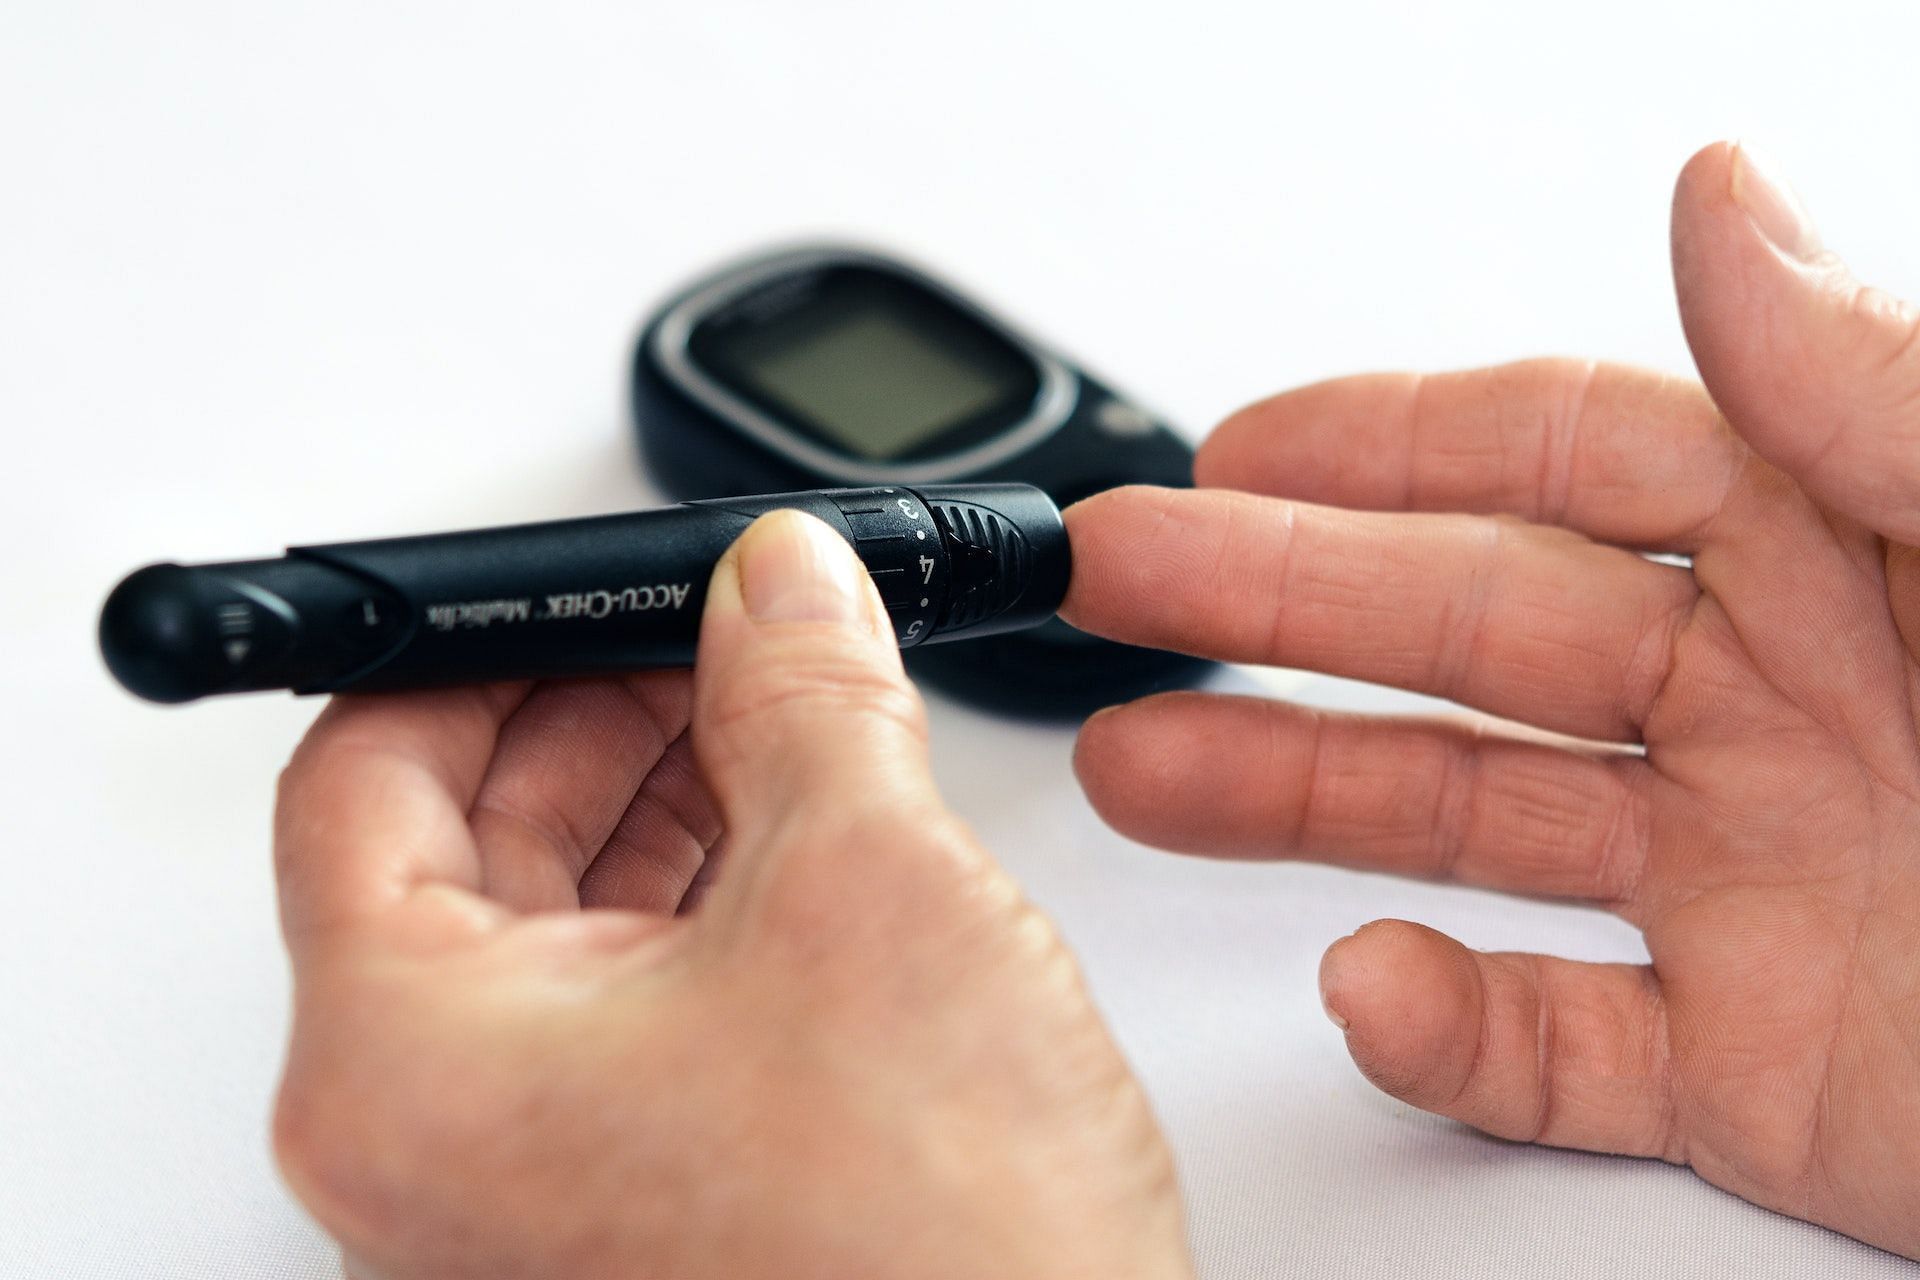 Diabetes is a very common reason for low magnesium levels. (Image via Pexels/PhotoMIX Company)